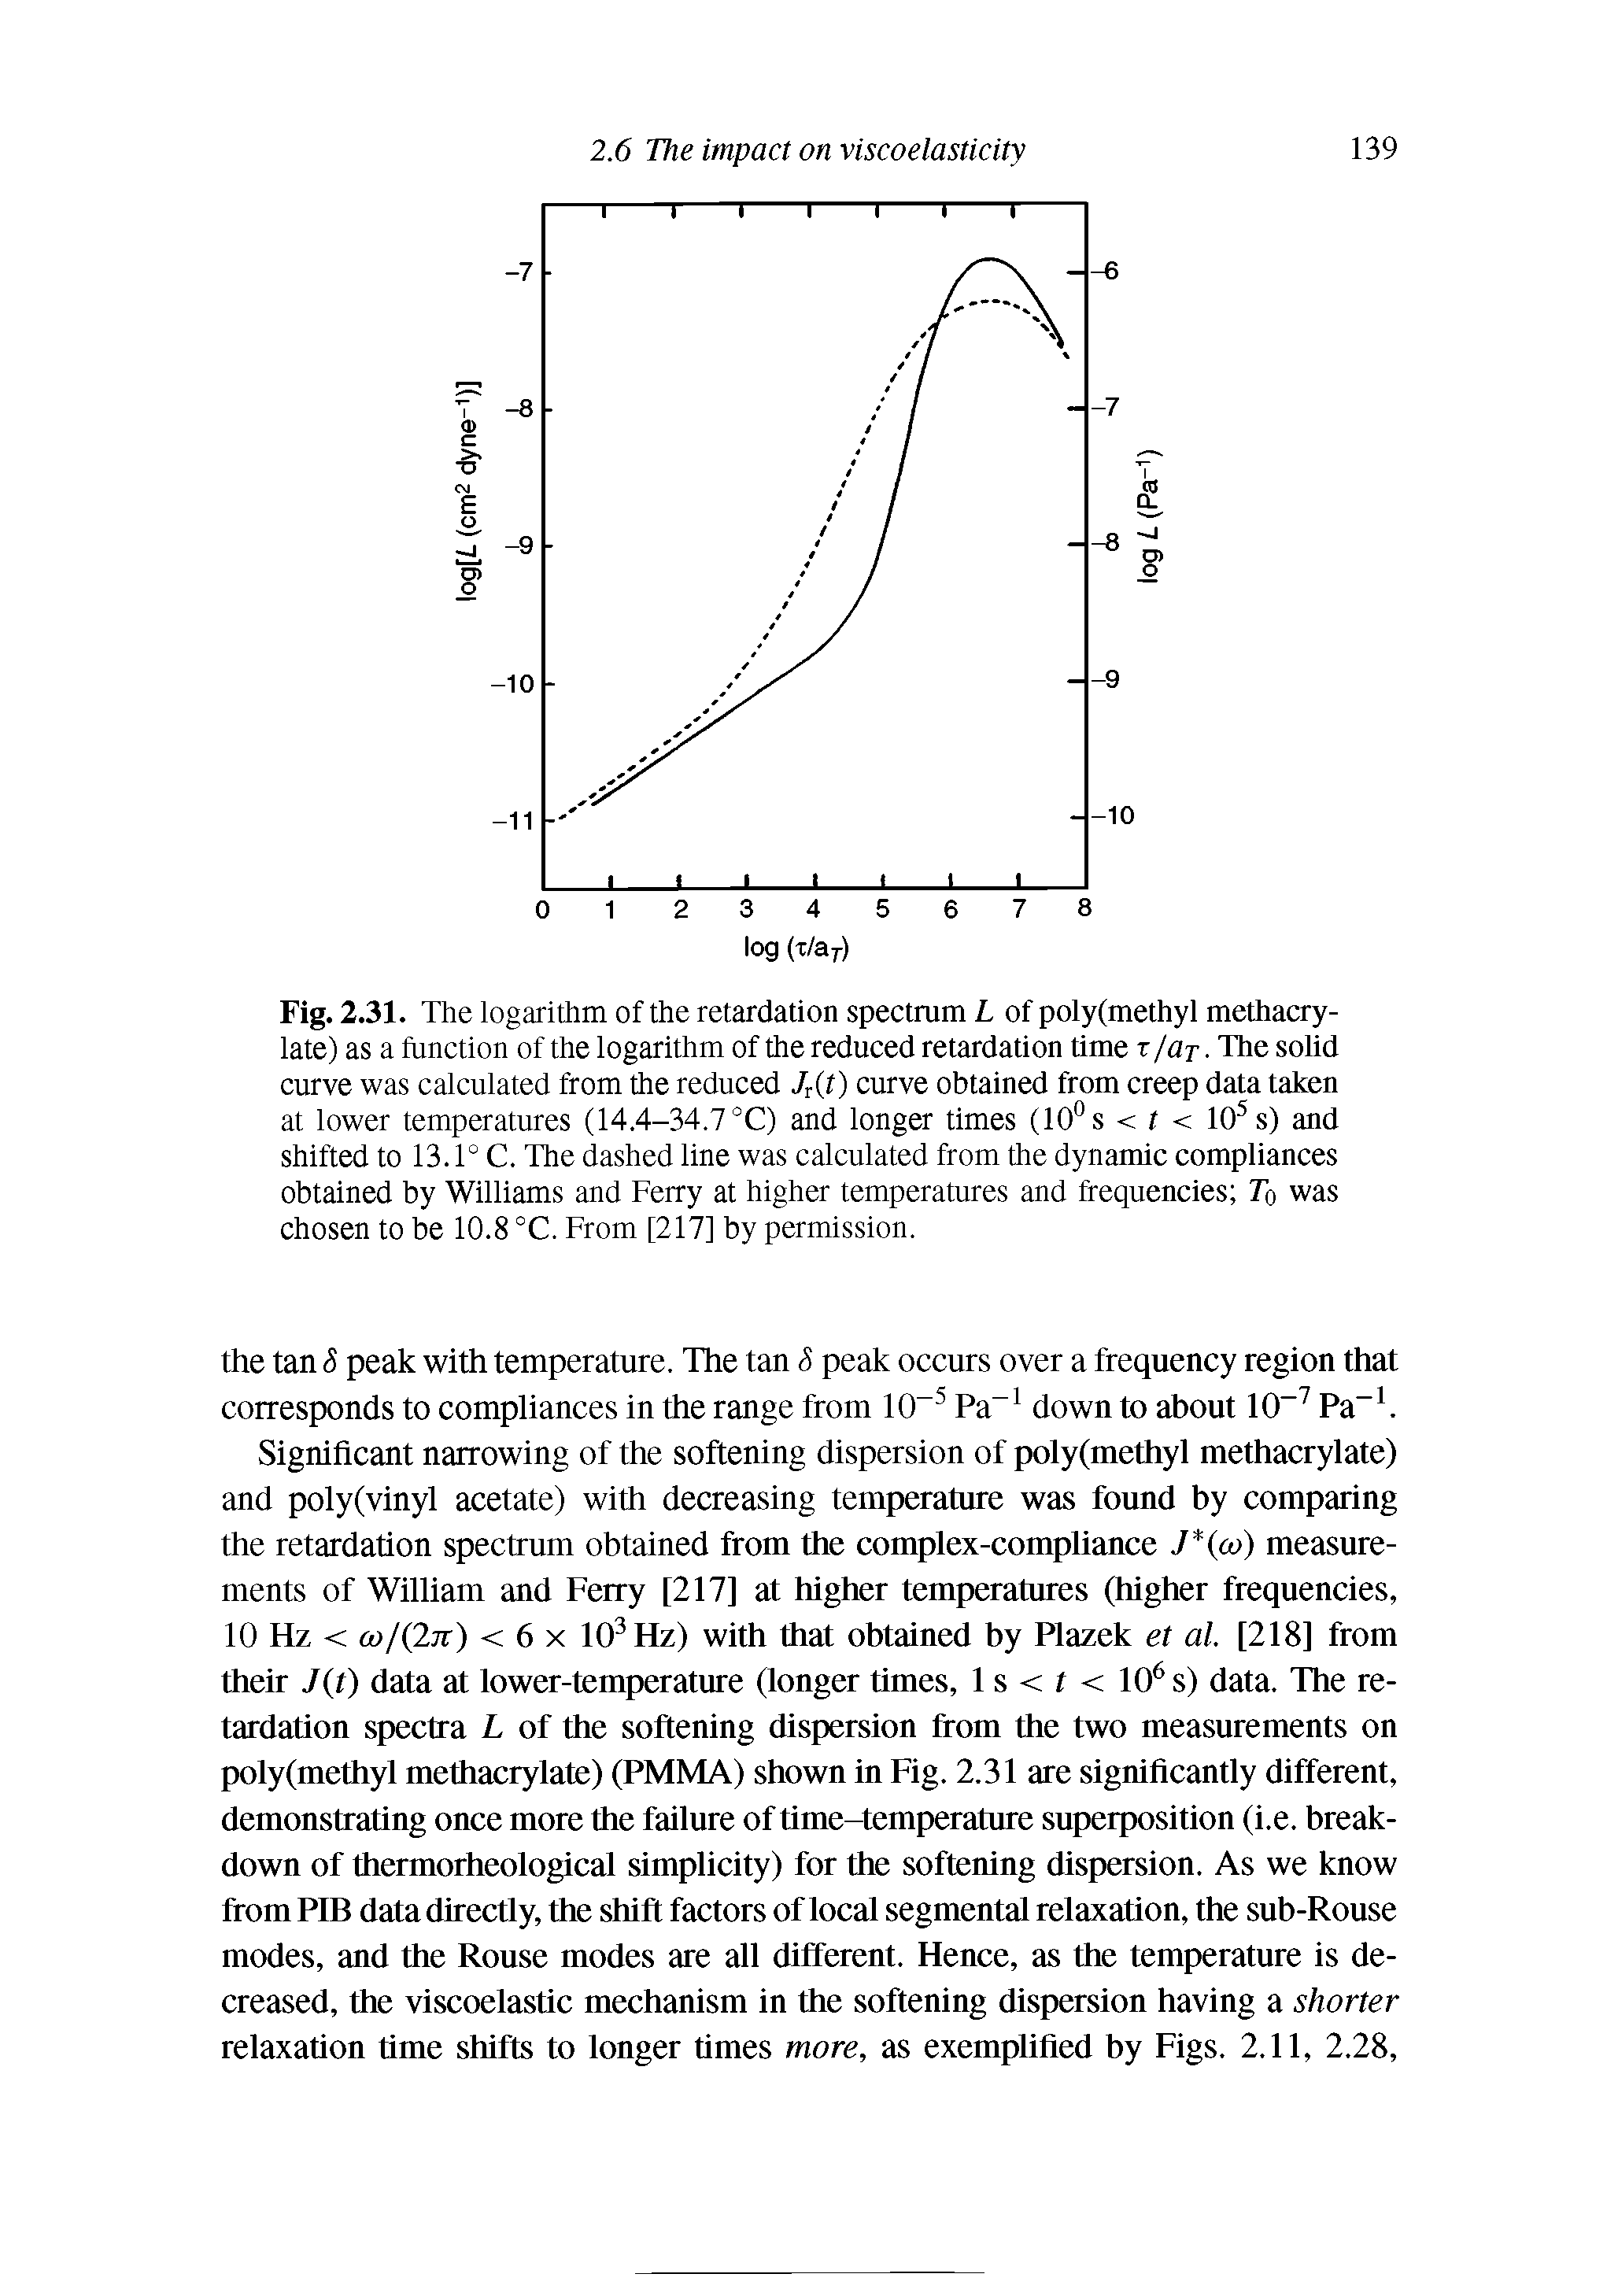 Fig. 2.31. The logarithm of the retardation spectrum L of poly(methyl methacrylate) as a function of the logarithm of the reduced retardation time r/ar. The solid curve was calculated from the reduced Jr(t) curve obtained from creep data taken at lower temperatures (14.4-34.7 °C) and longer times (10° s < r < 10 s) and shifted to 13.1° C. The dashed line was calculated from the dynamic compliances obtained by Williams and Ferry at higher temperatures and frequencies To was chosen to be 10.8 °C. From [217] by permission.